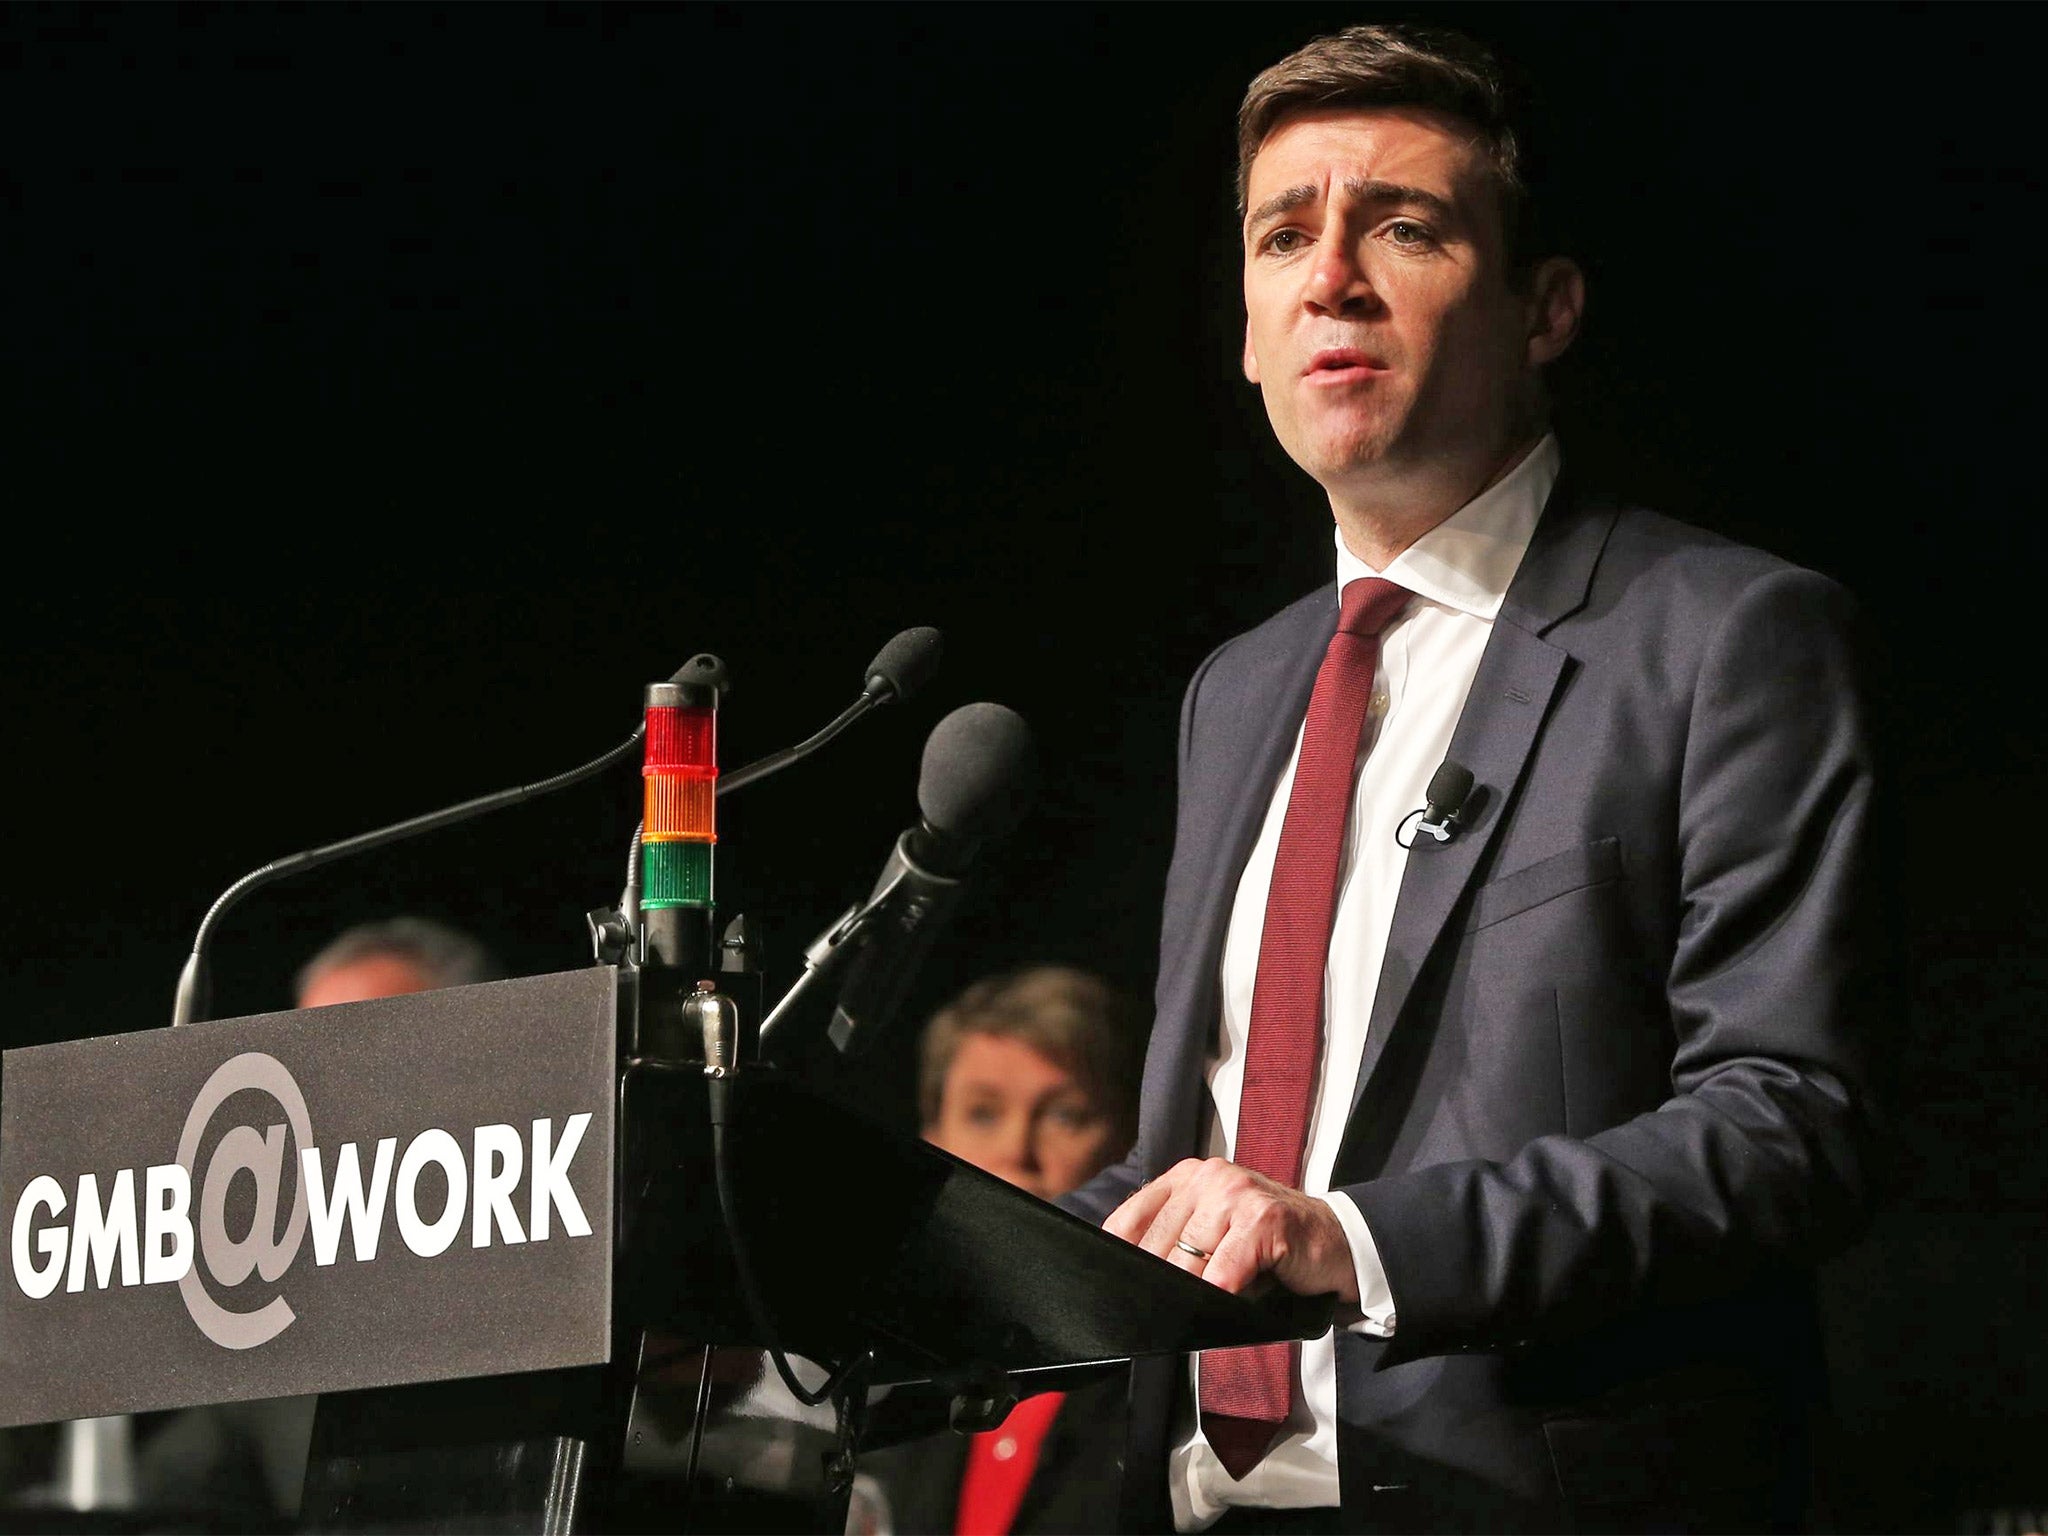 Labour leadership contender Andy Burnham addresses delegates at the annual conference of the GMB union in Dublin earlier this month